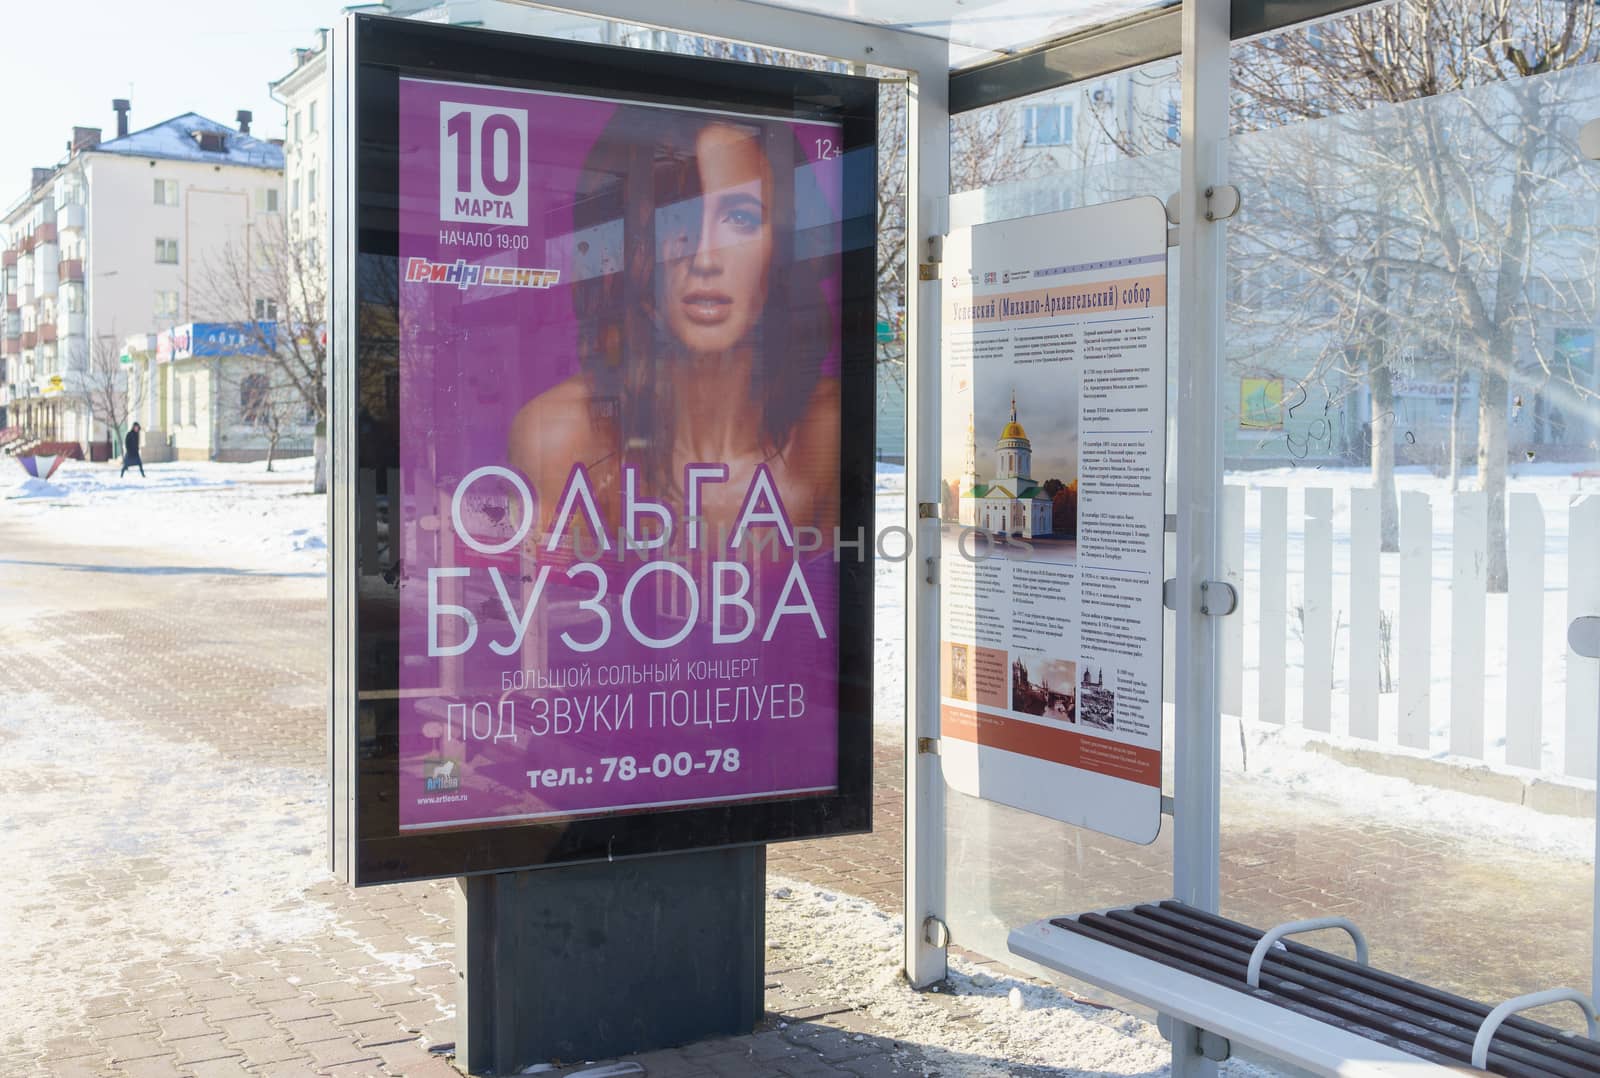 February 7, 2018 Orel, Russia. Poster of Russian singer Olga Buzova at the bus stop in Orel.